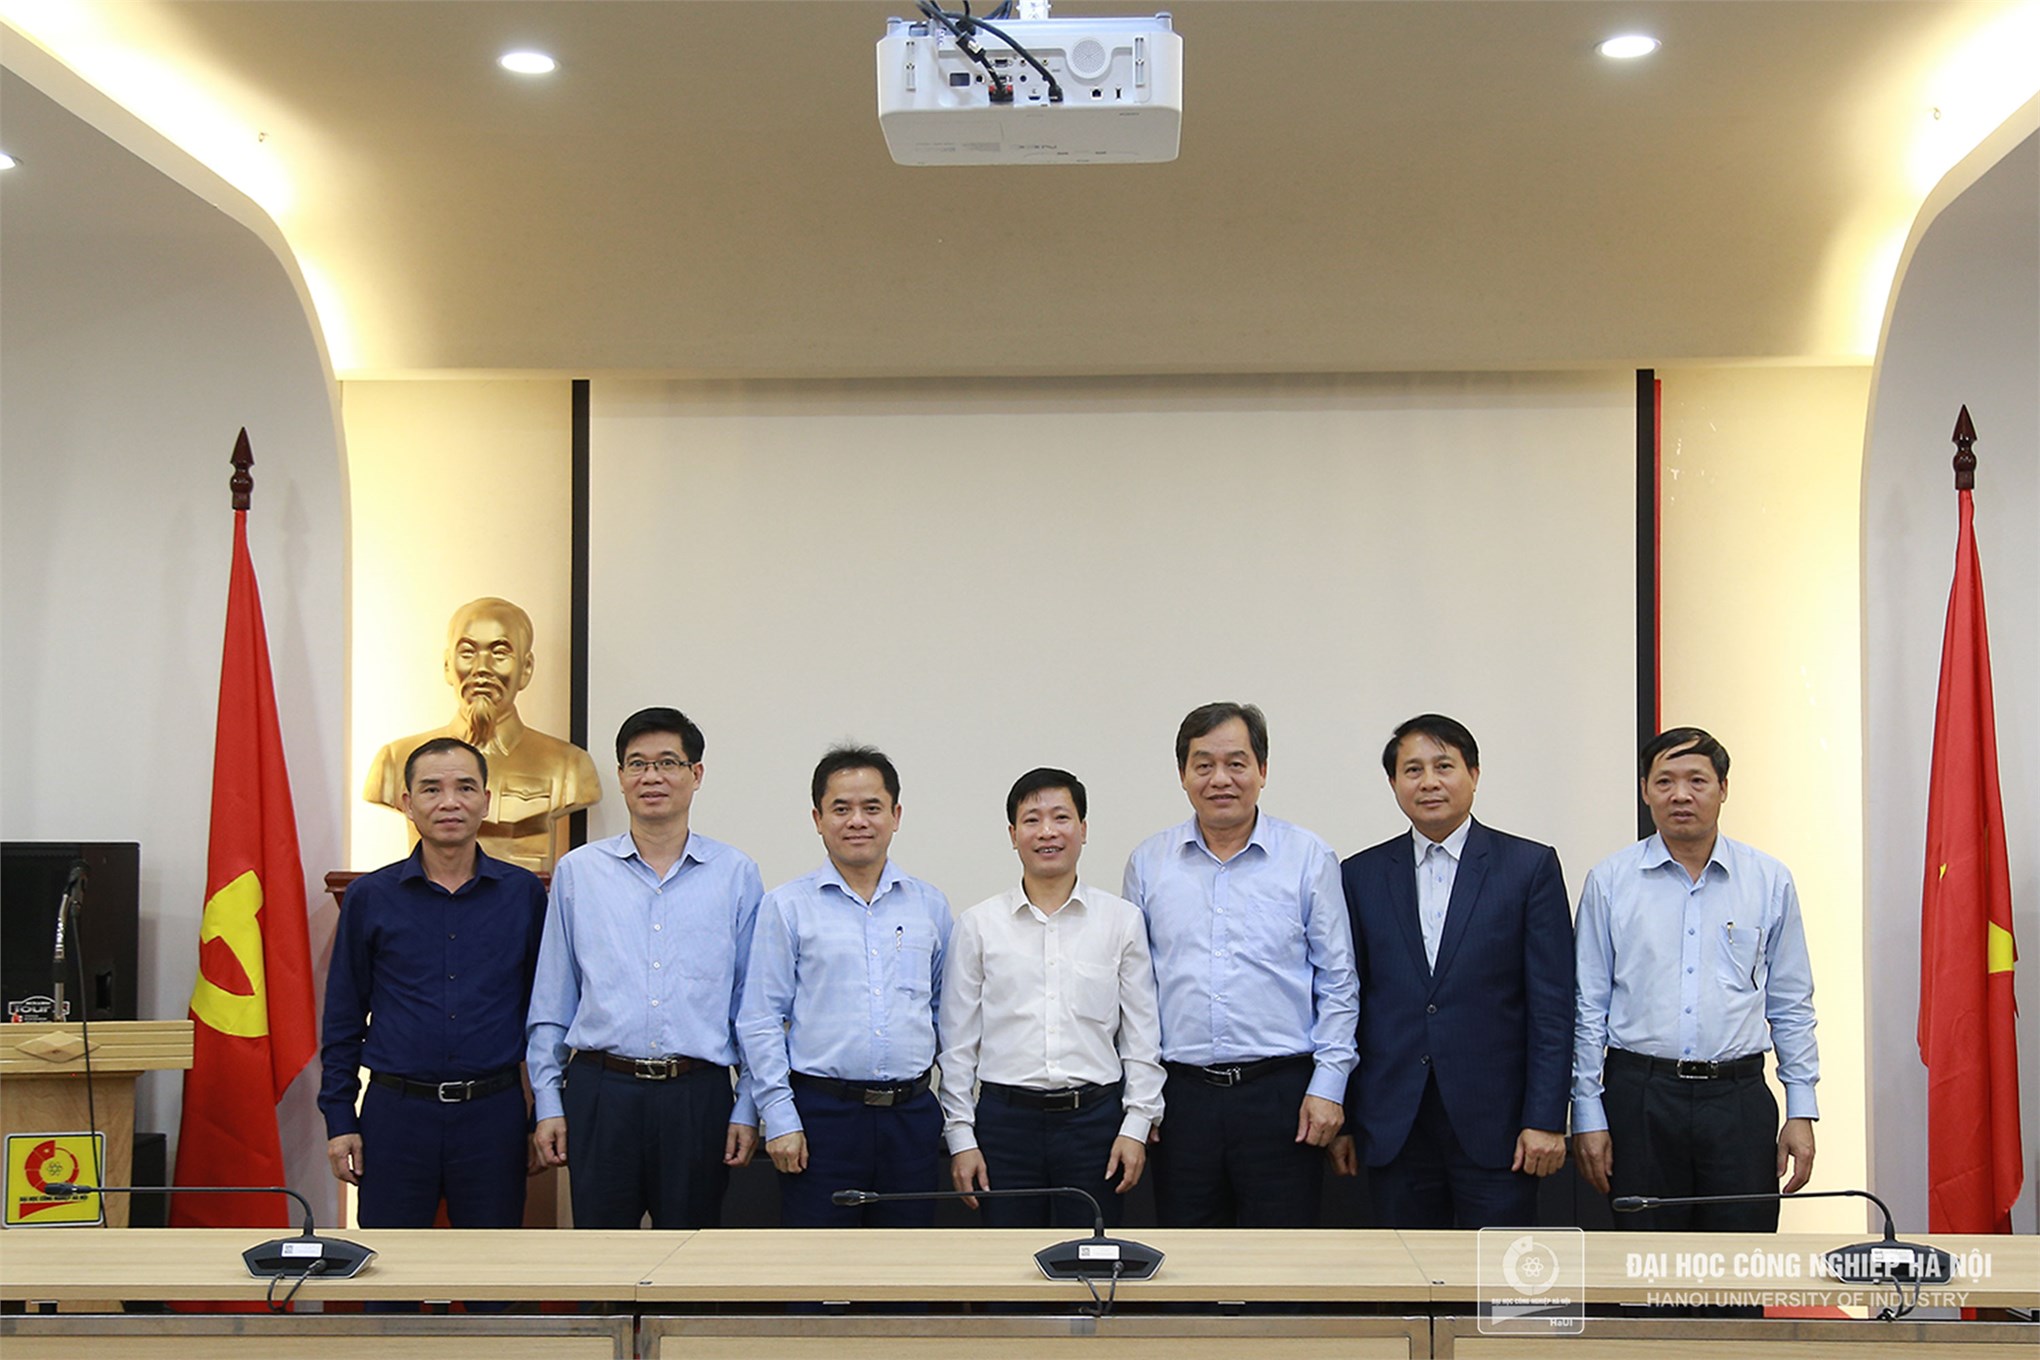 Delegation of University of Transport Technology paid a working visit to HaUI